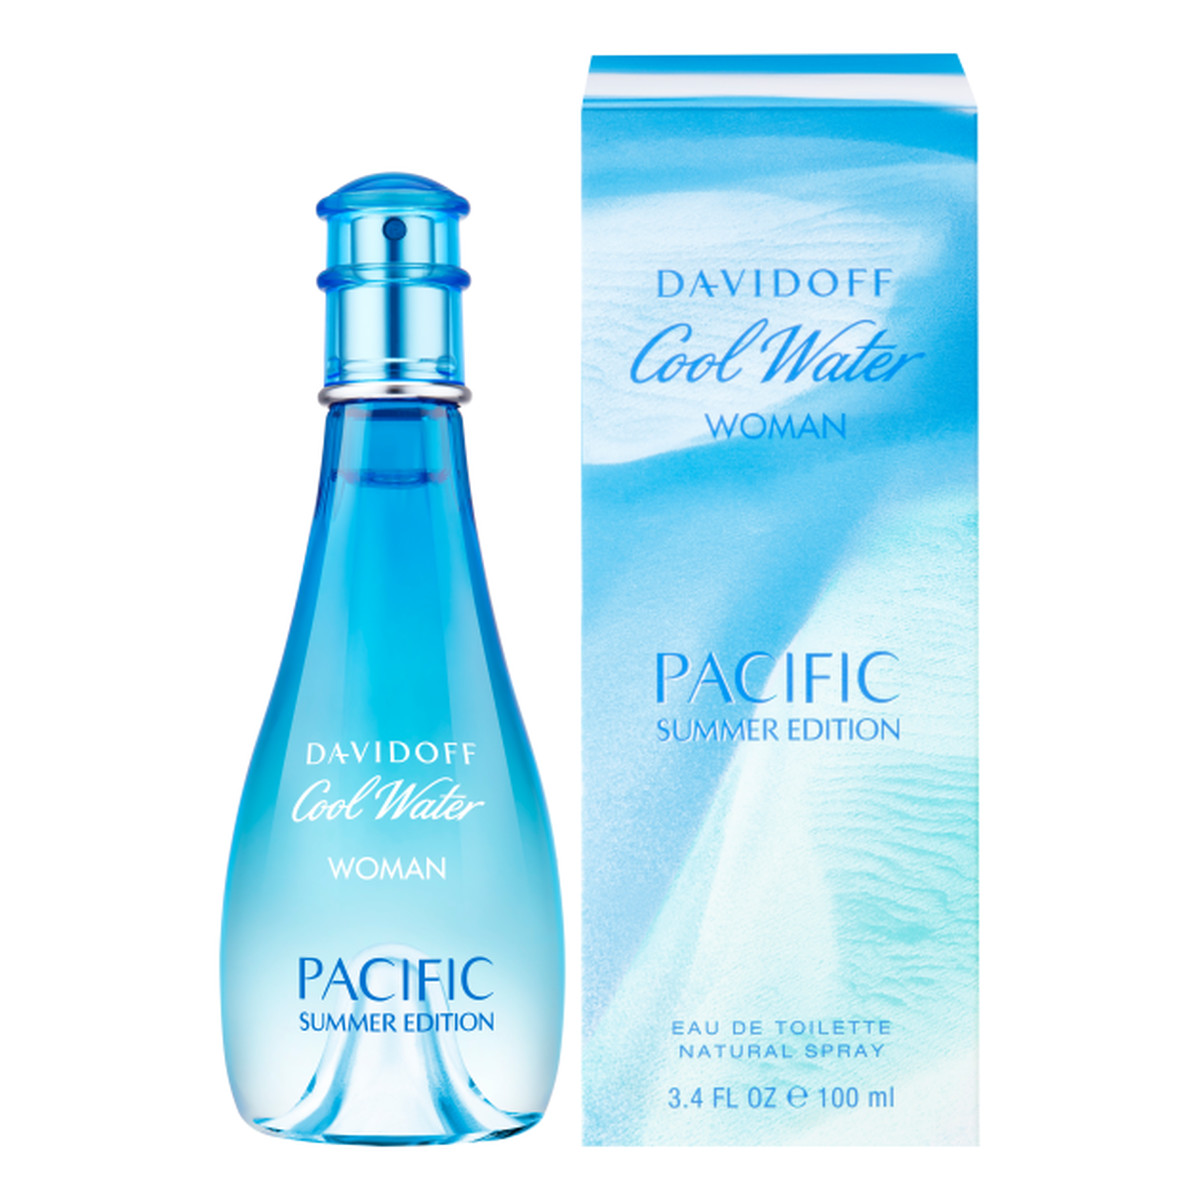 Davidoff Cool Water Woman Pacific Summer Edition EDT spray 100ml